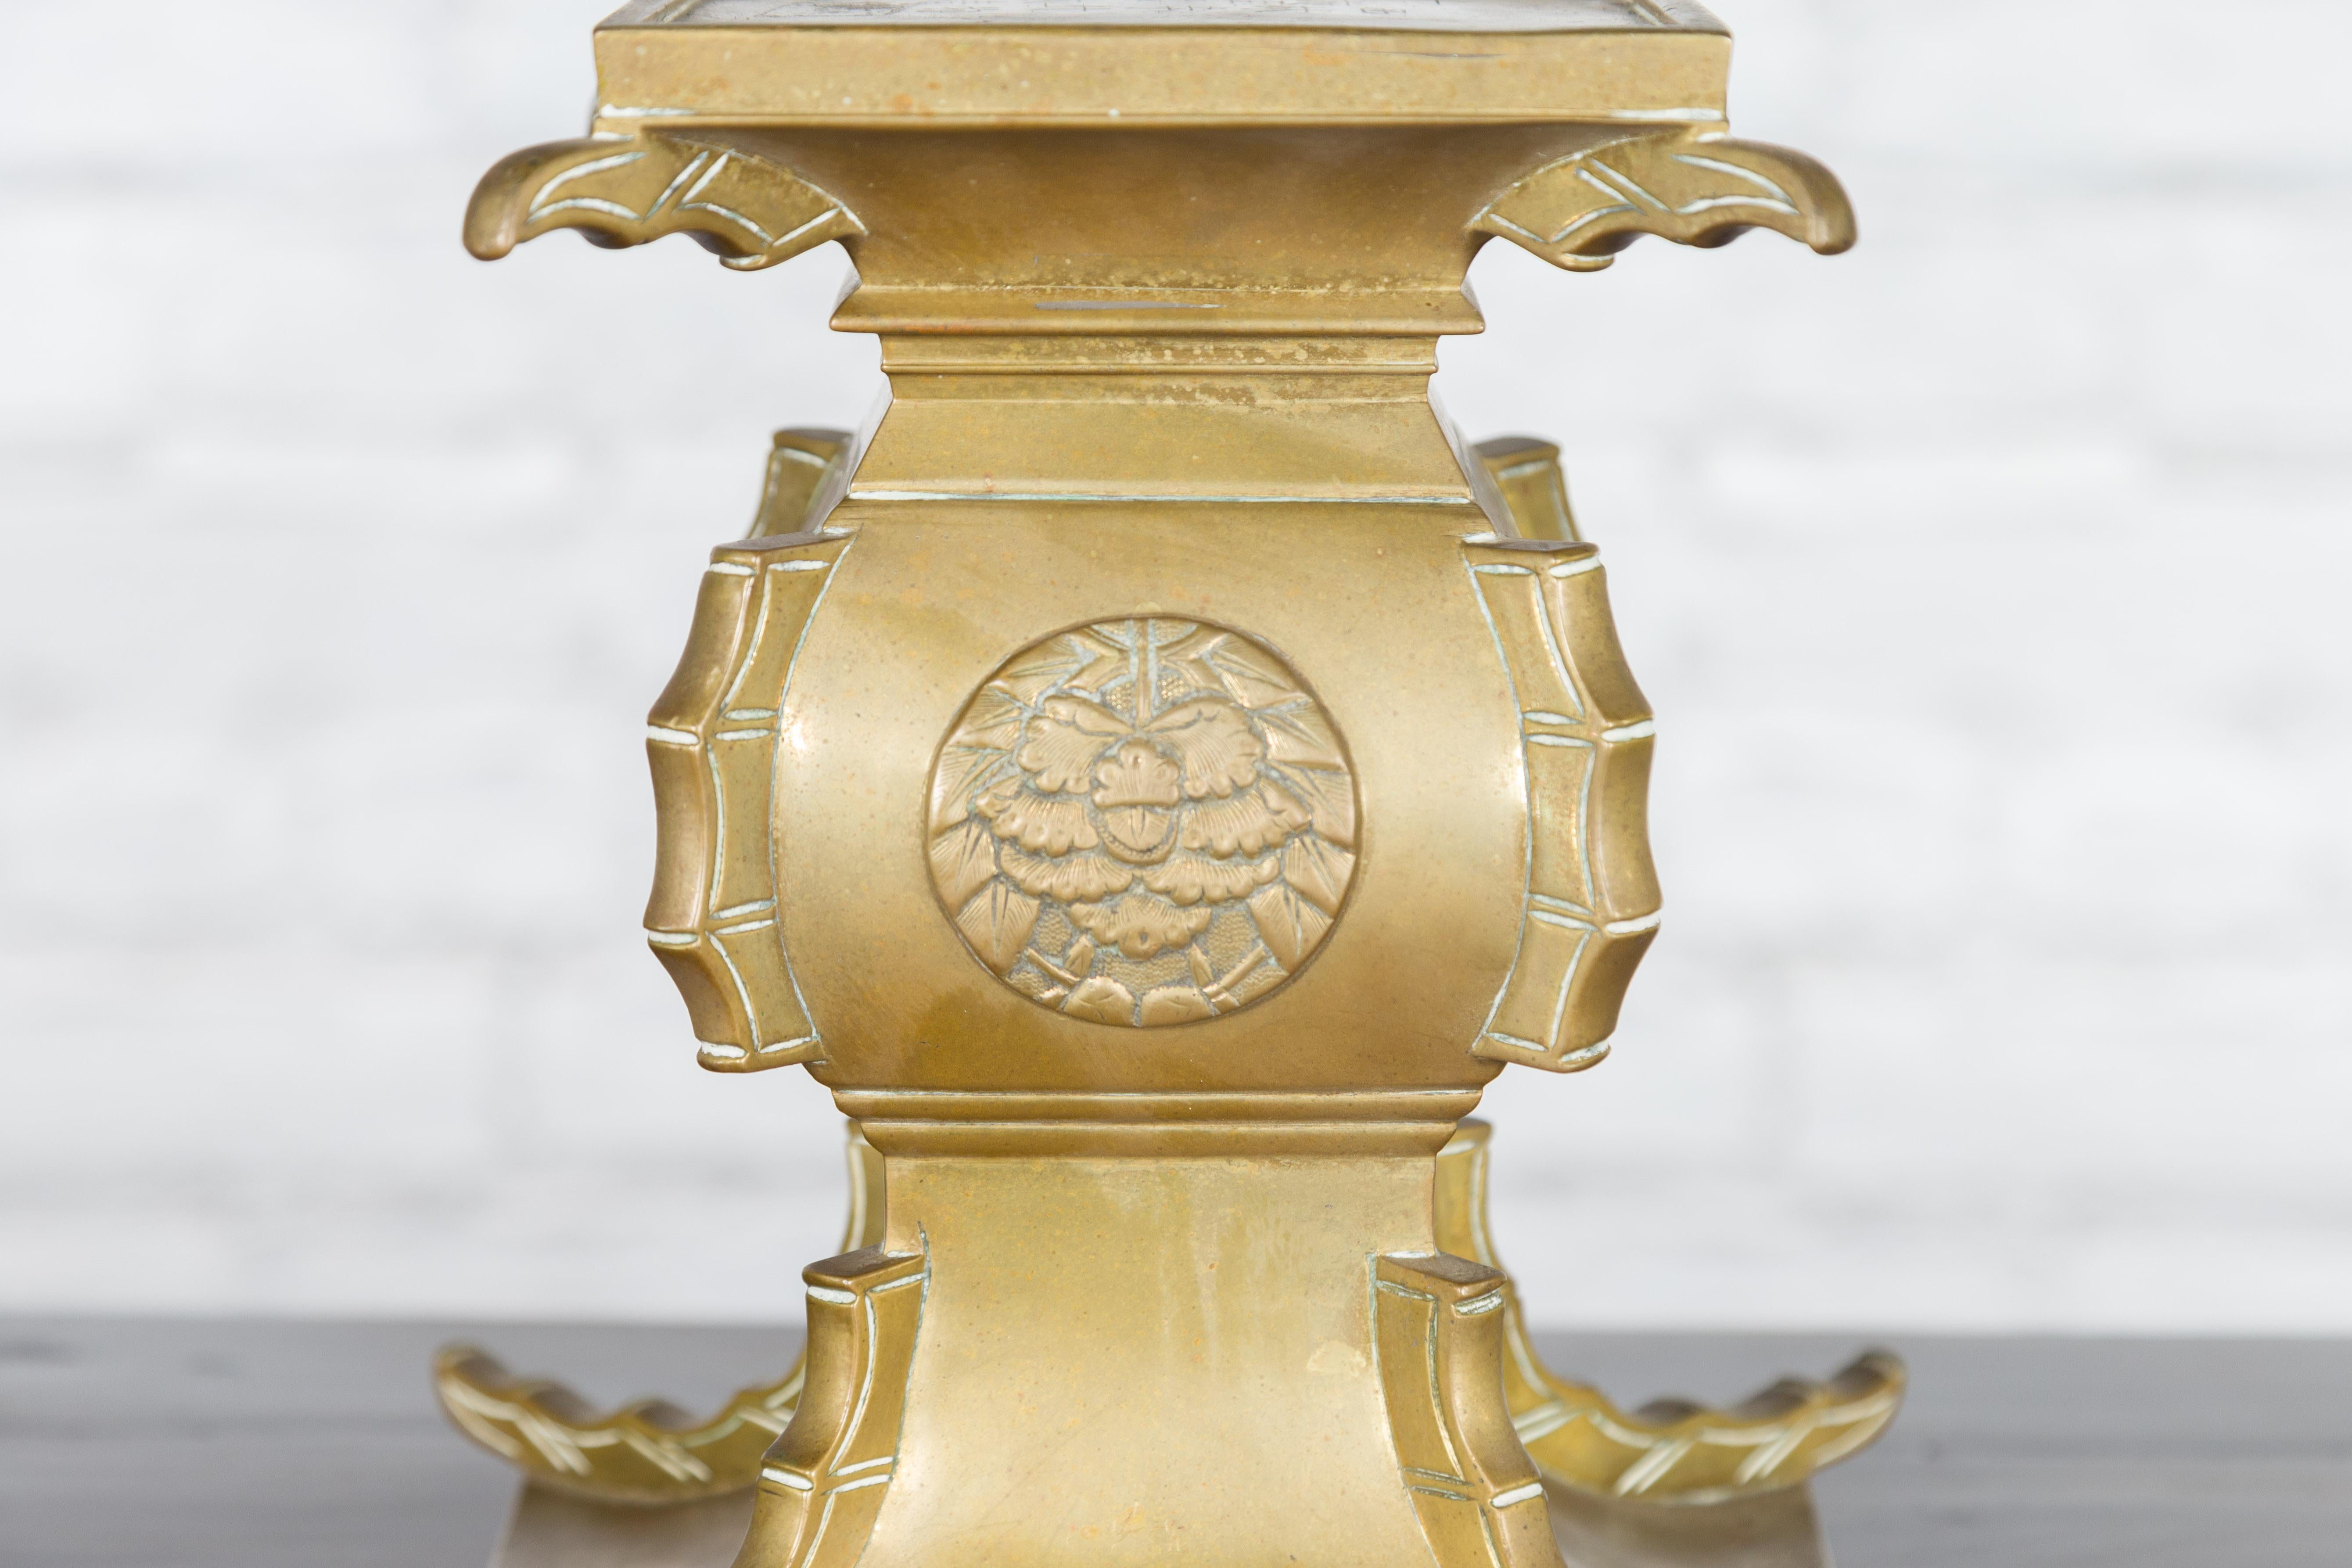 Japanese Meiji Period Brass Candle Holder with Scrolls and Medallions For Sale 7